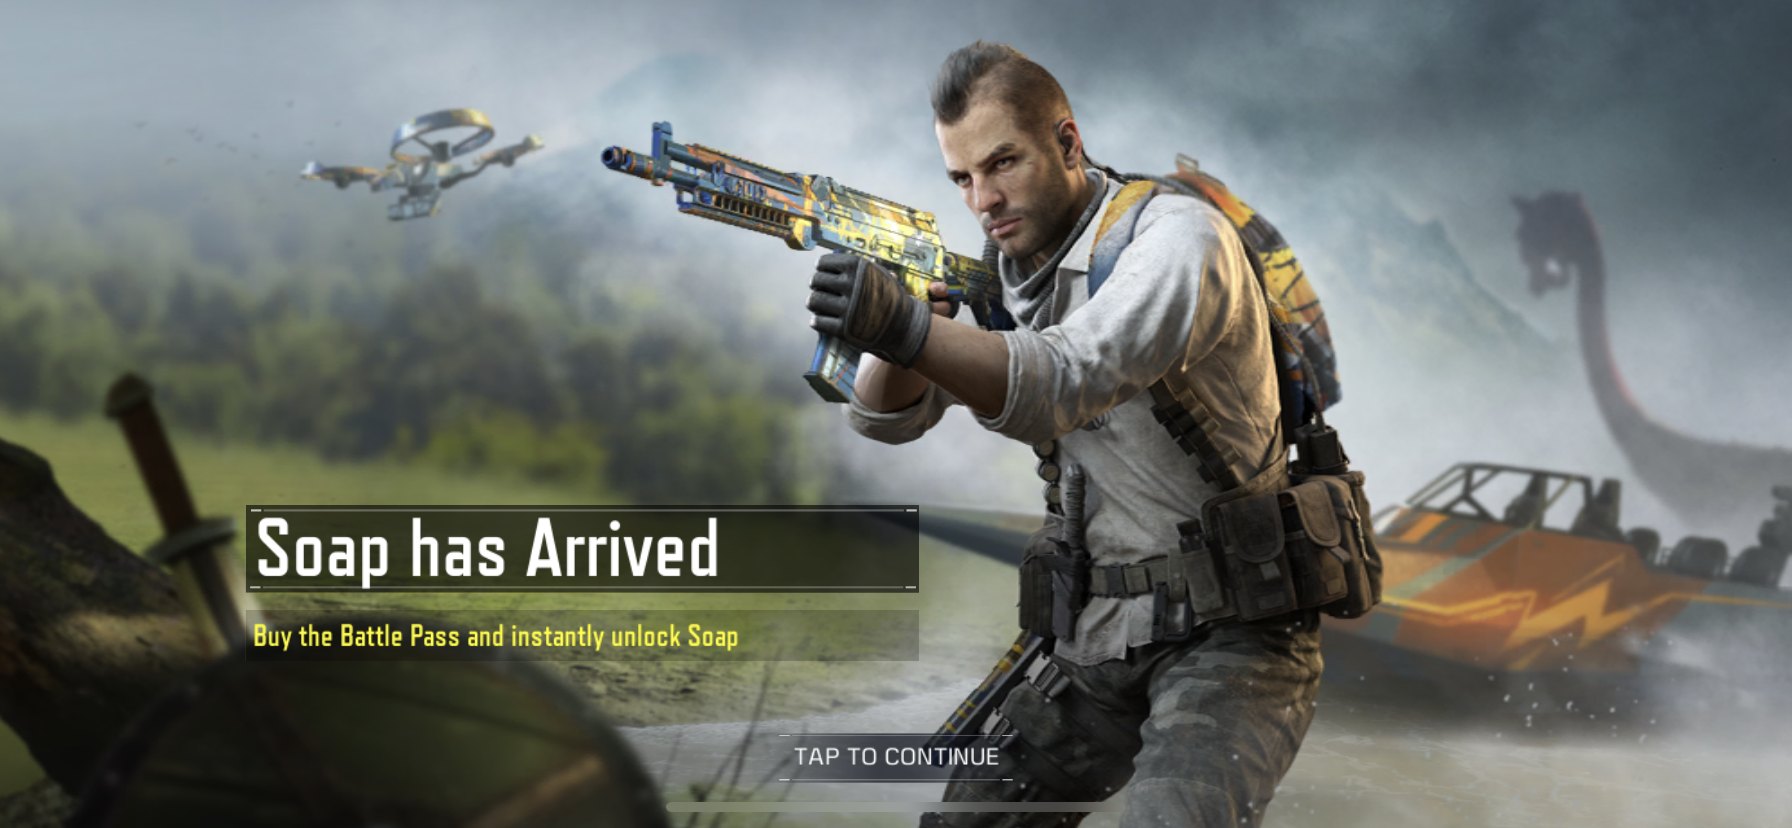 Call of Duty: Mobile Gets Zombies Mode, Controller Support (Updated)